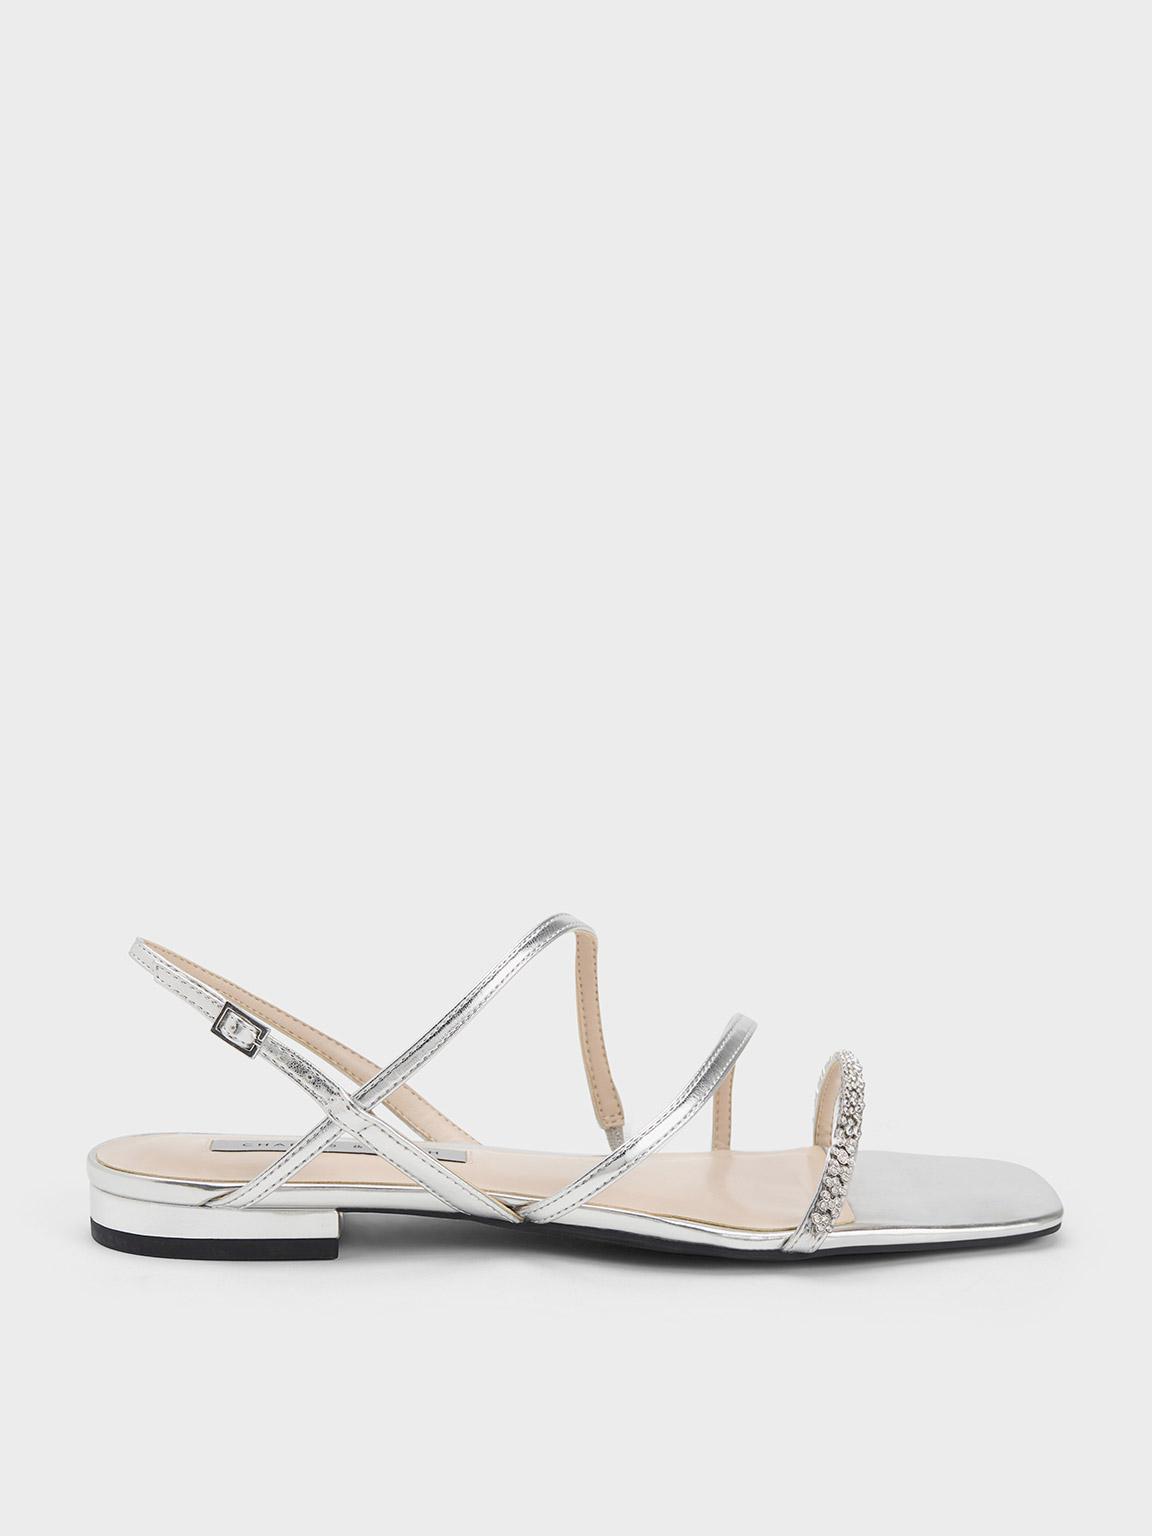 Charles & Keith Gem-encrusted Strappy Metallic Slingback Sandals in White |  Lyst